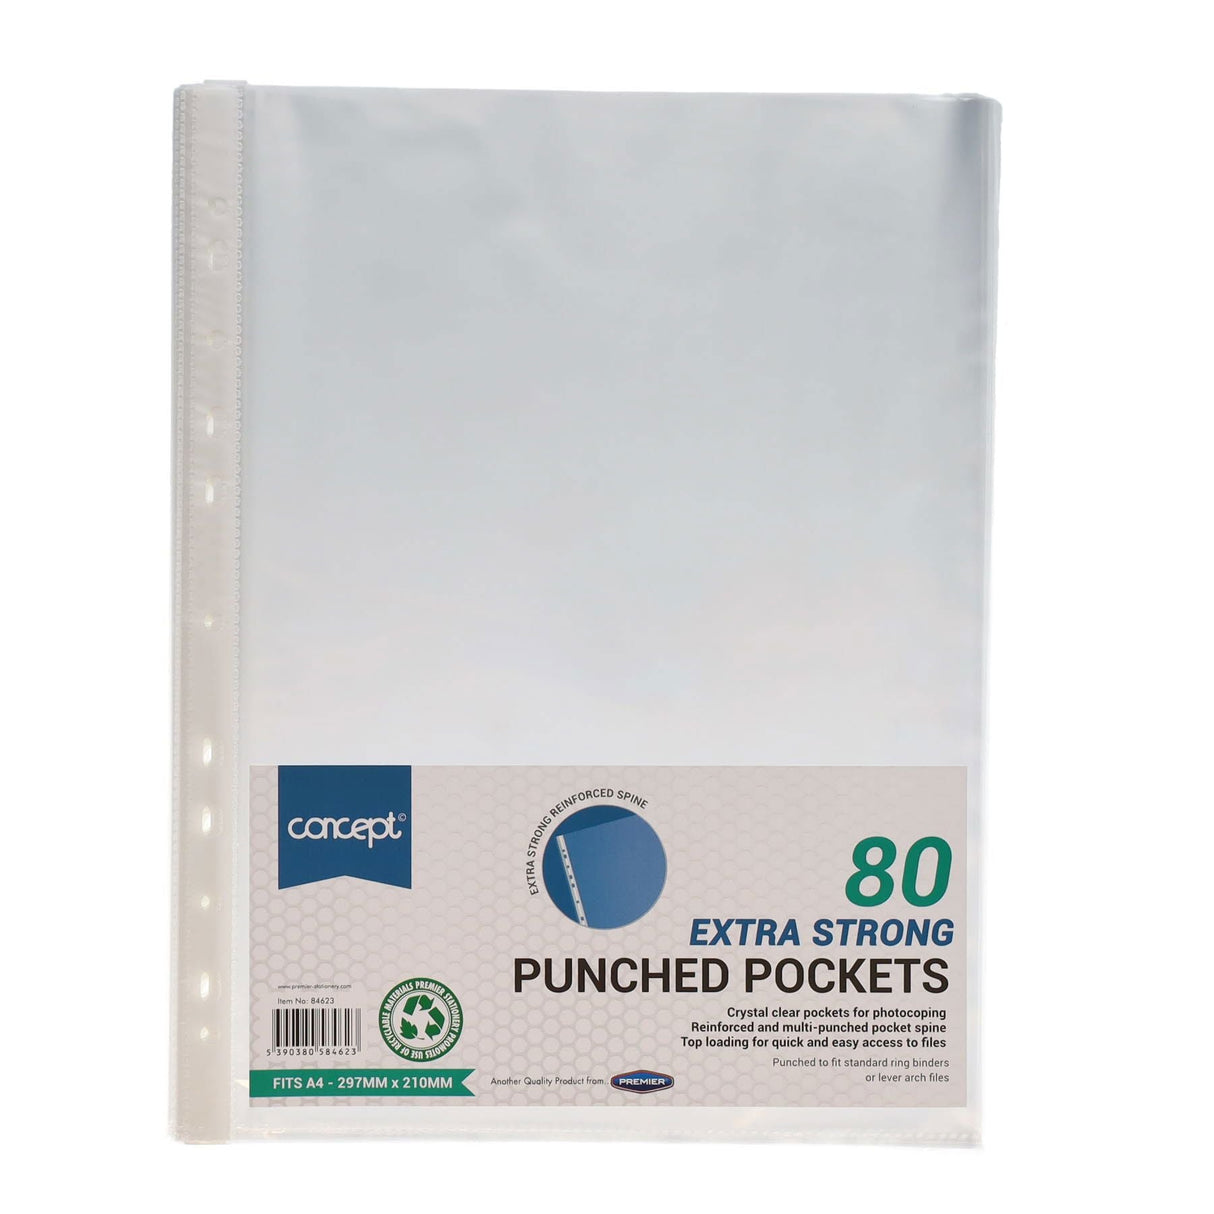 Premier Office A4 Protective Punched Pockets - Pack of 80 | Stationery Shop UK